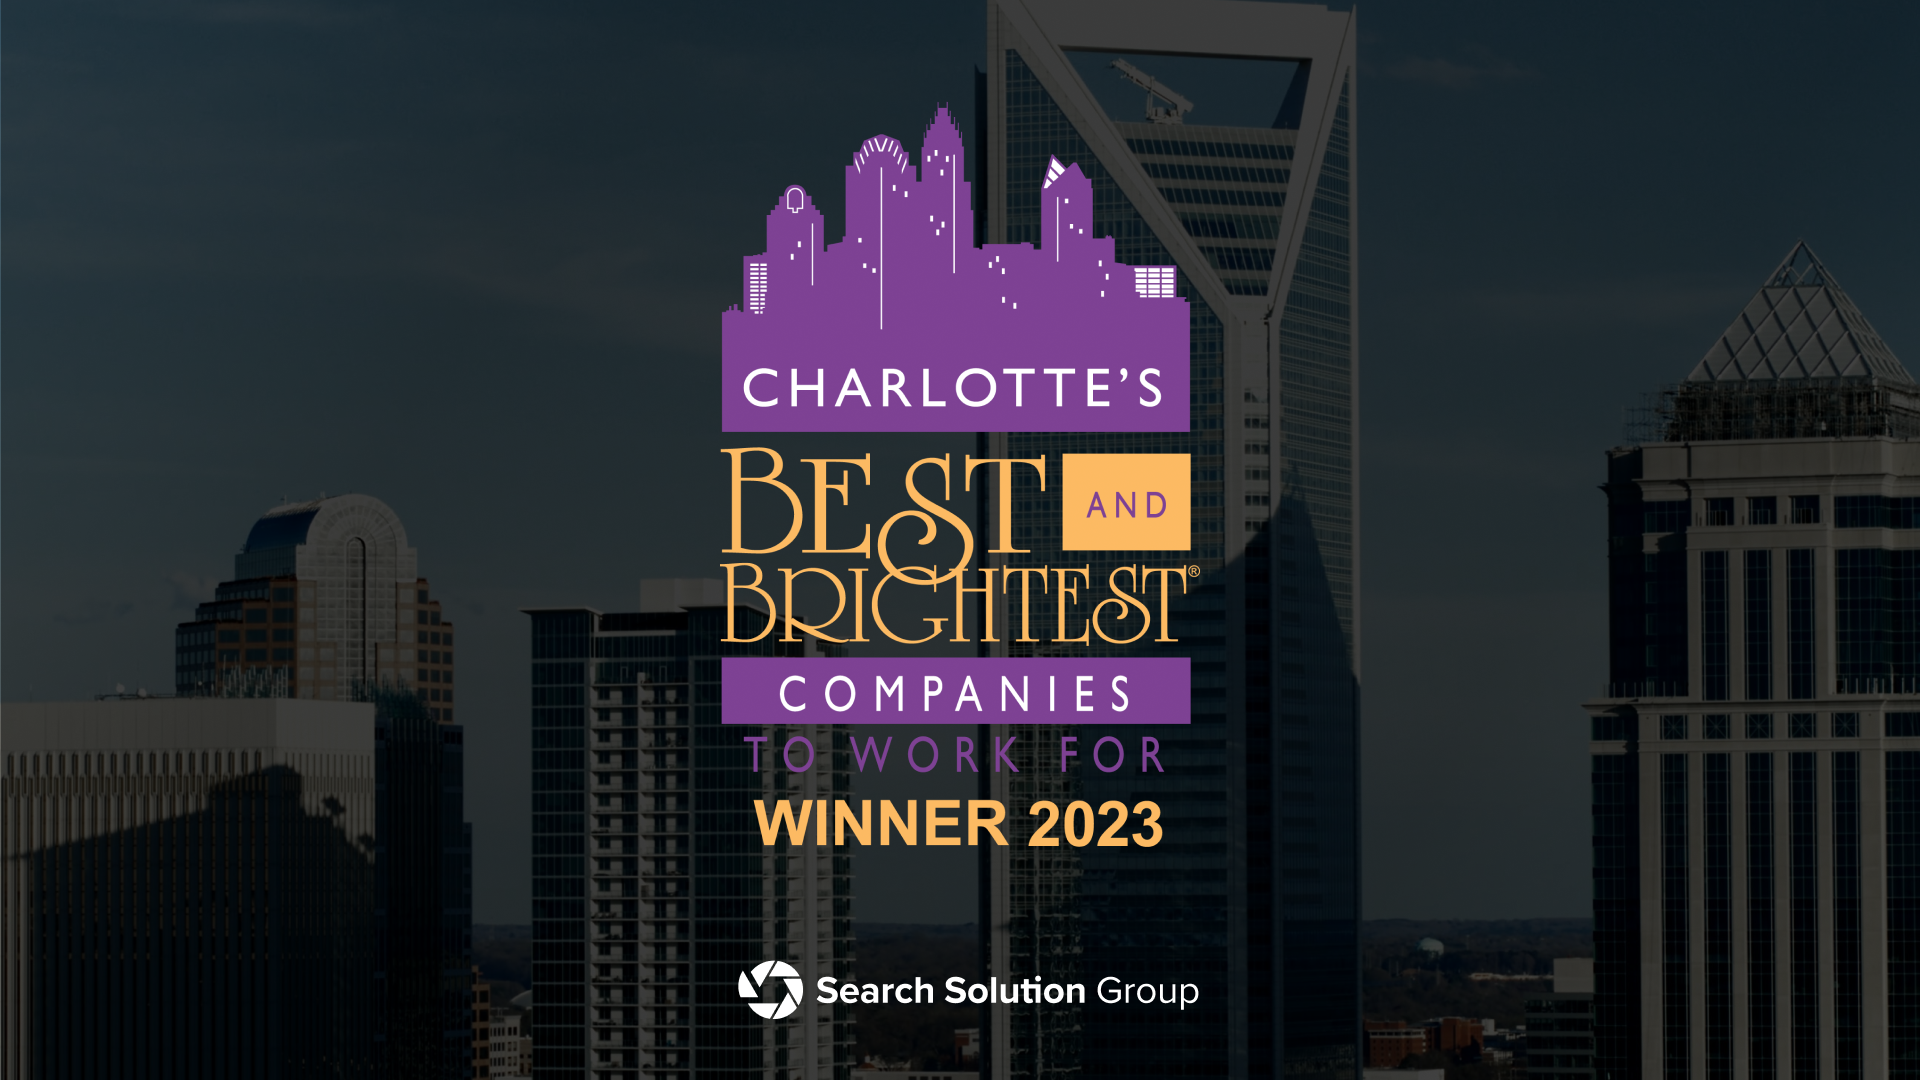 Proud Winner of the “Best & Brightest Companies to Work For in Charlotte”